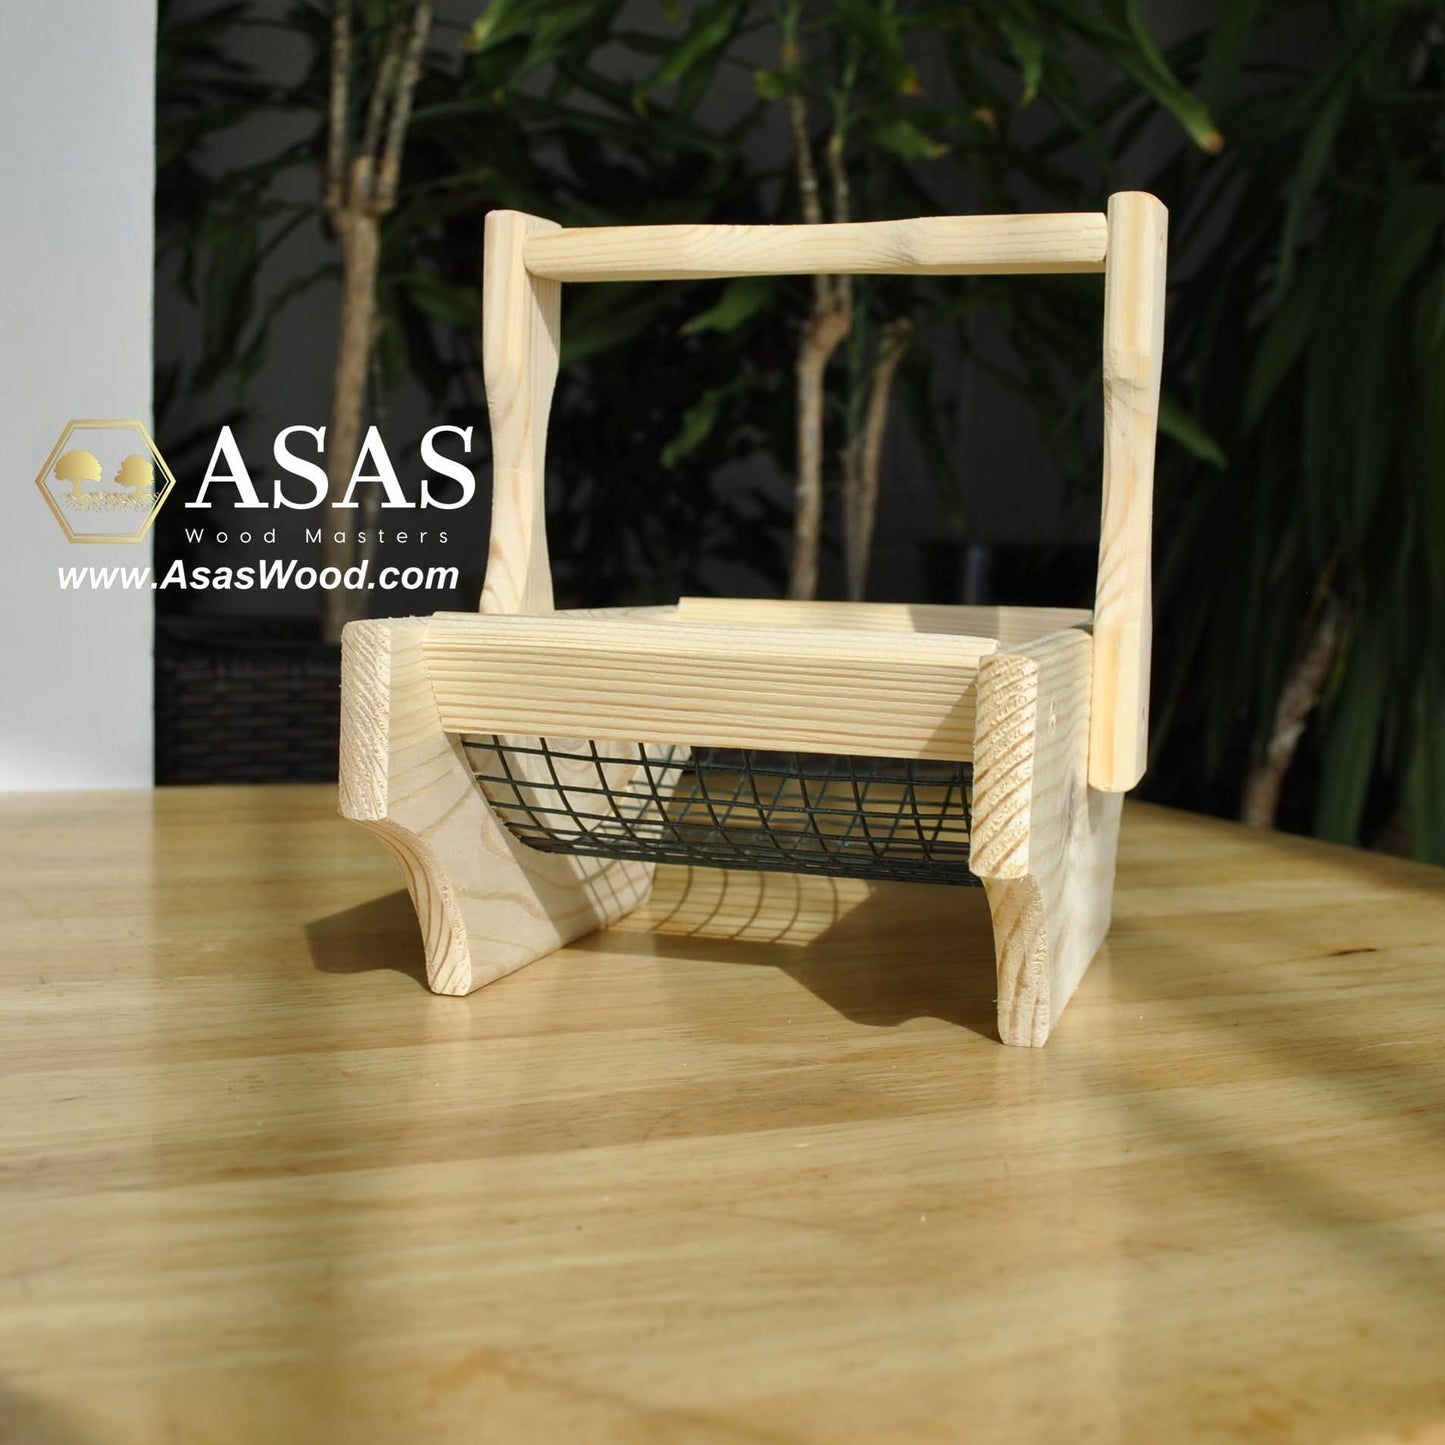 Egg basket, Made by AsasWood